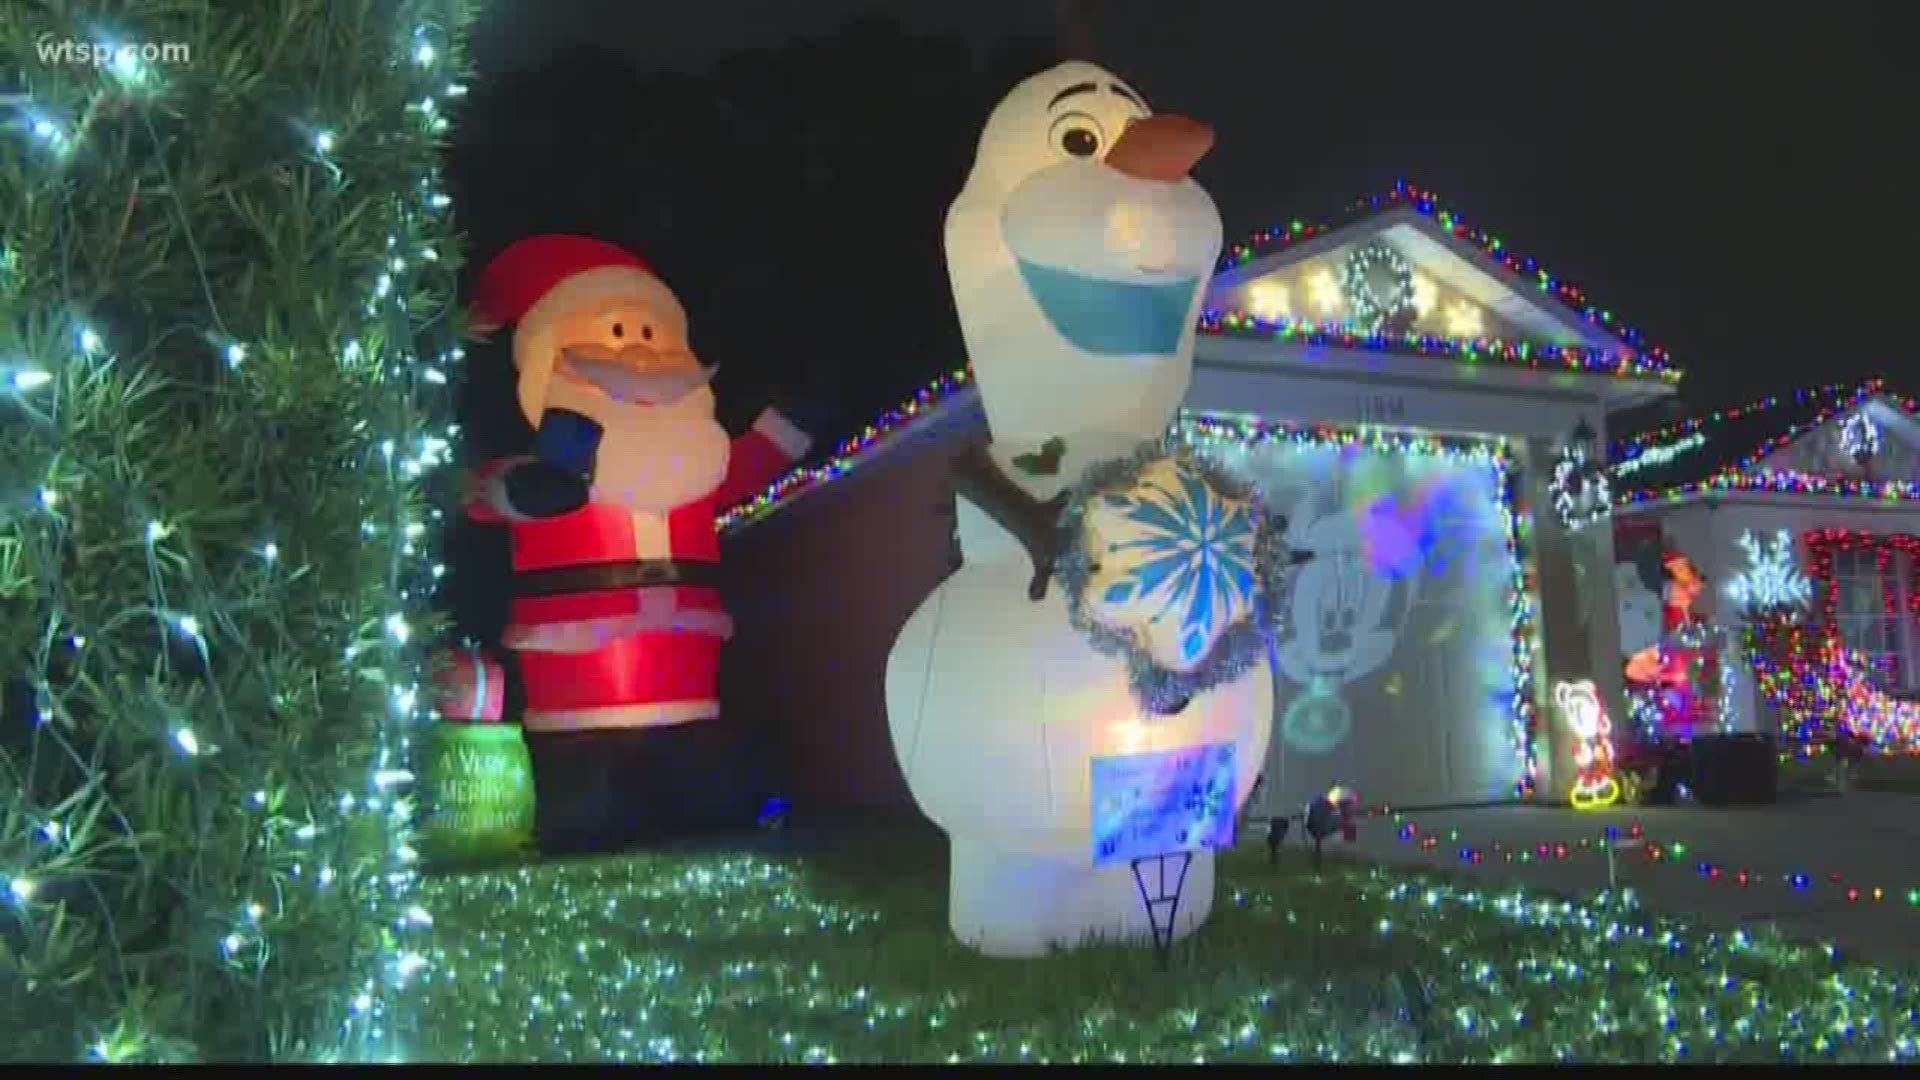 Jim Carson says this year's display includes 55,000 lights.